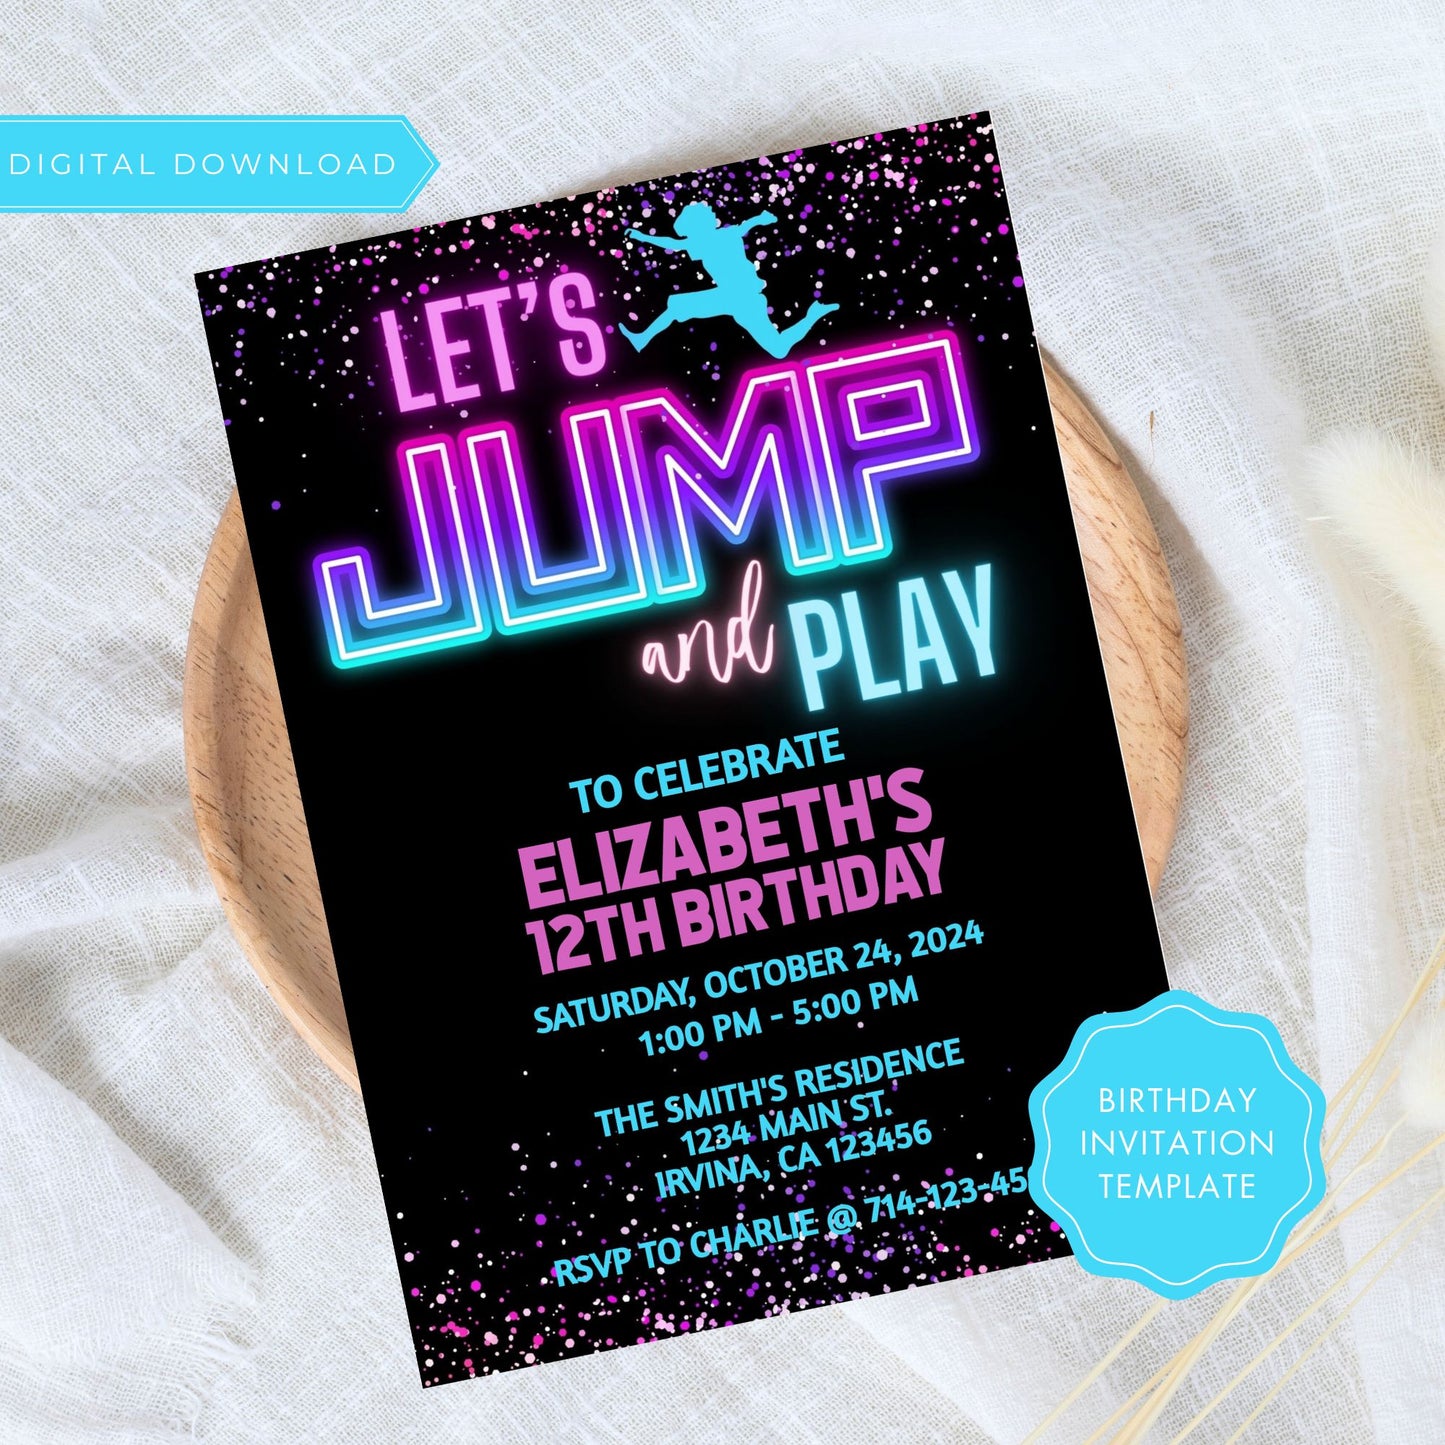 Let's Jump and Play Birthday Invitation Template